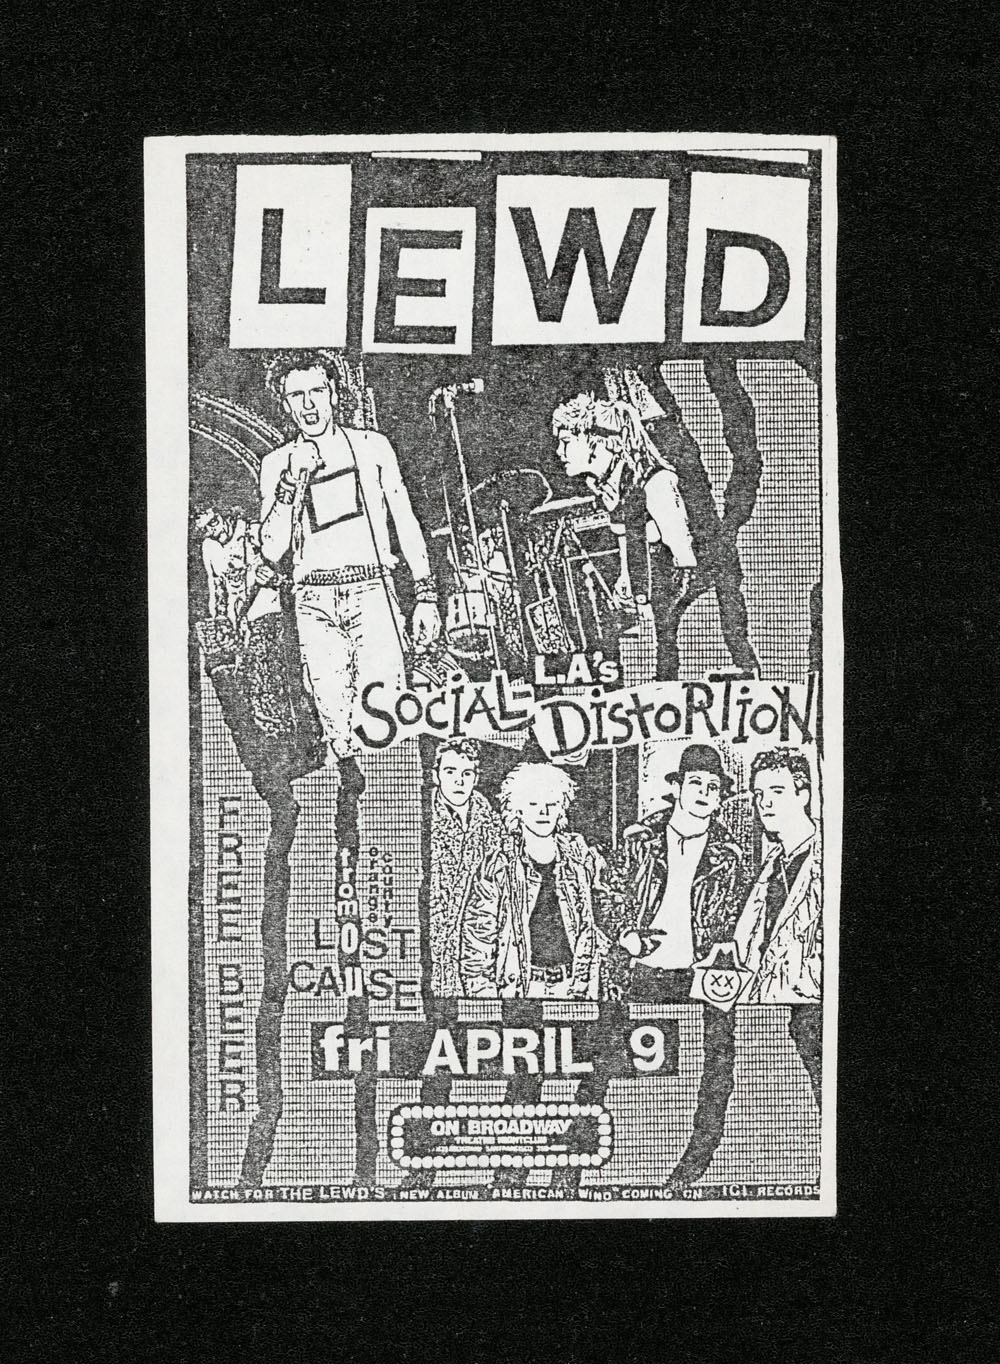 LEWD w/ Social Distortion, Lost Cause at On Broadway